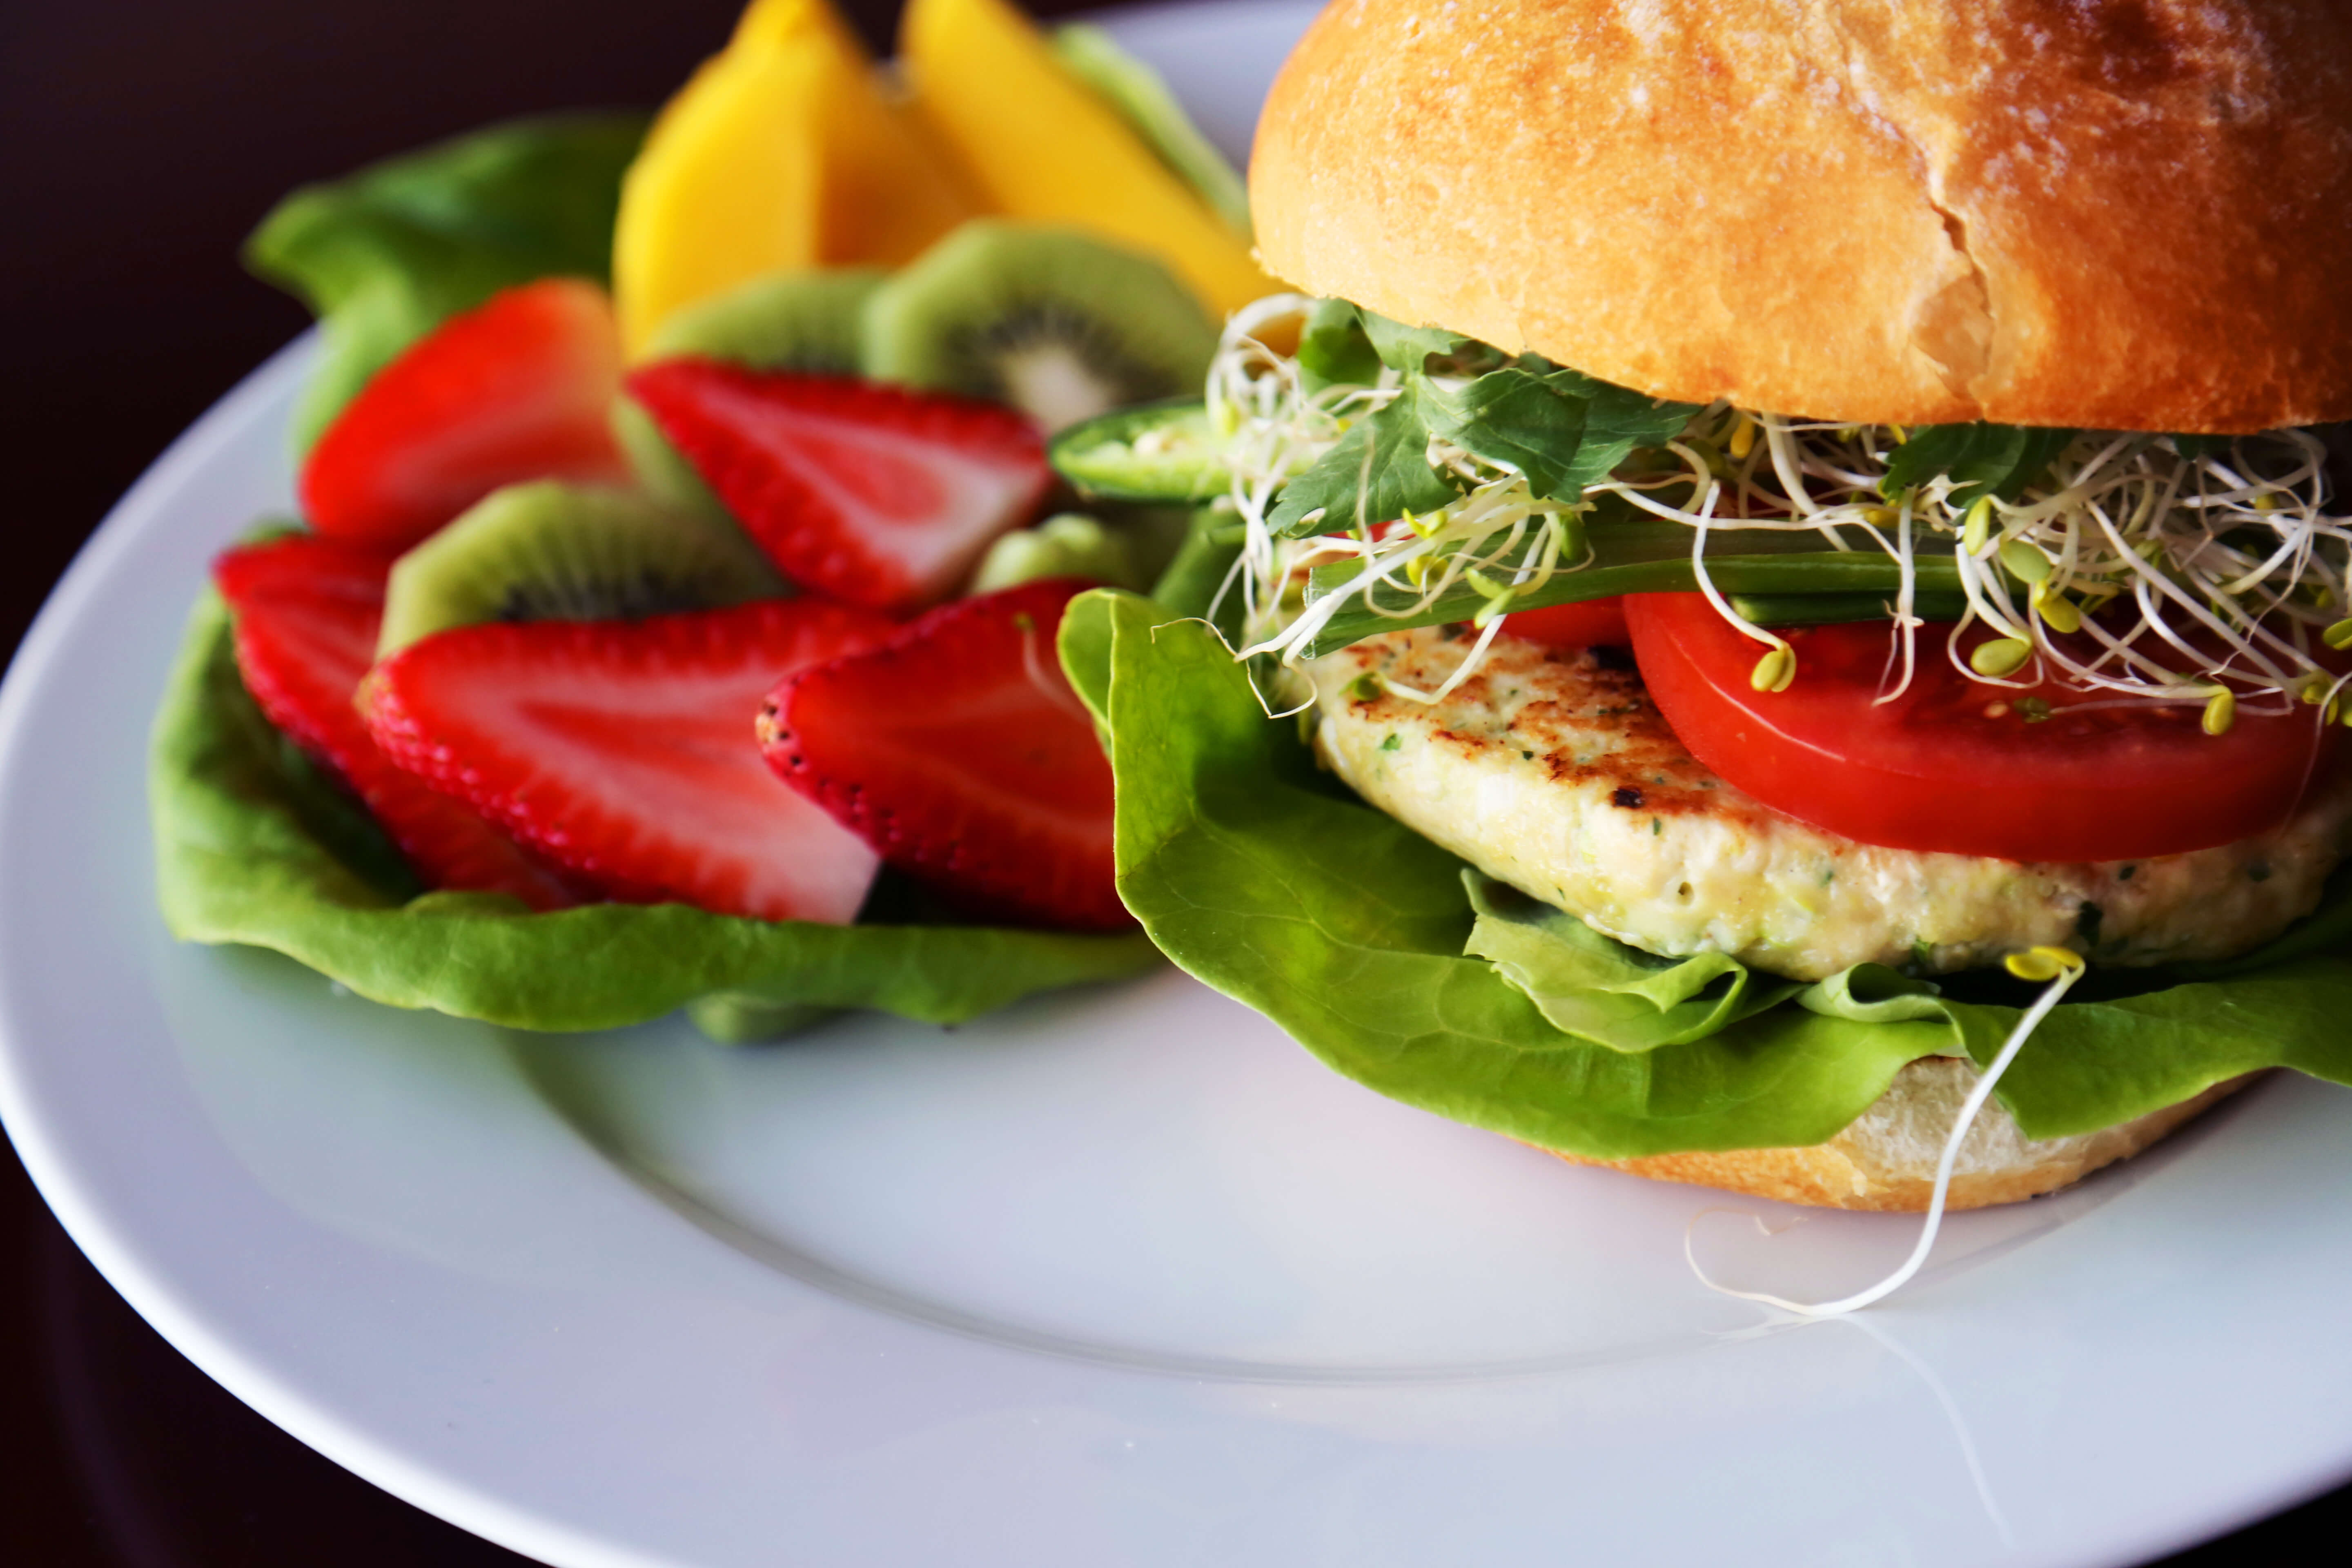 This avocado chicken burger is the perfect summer meal.